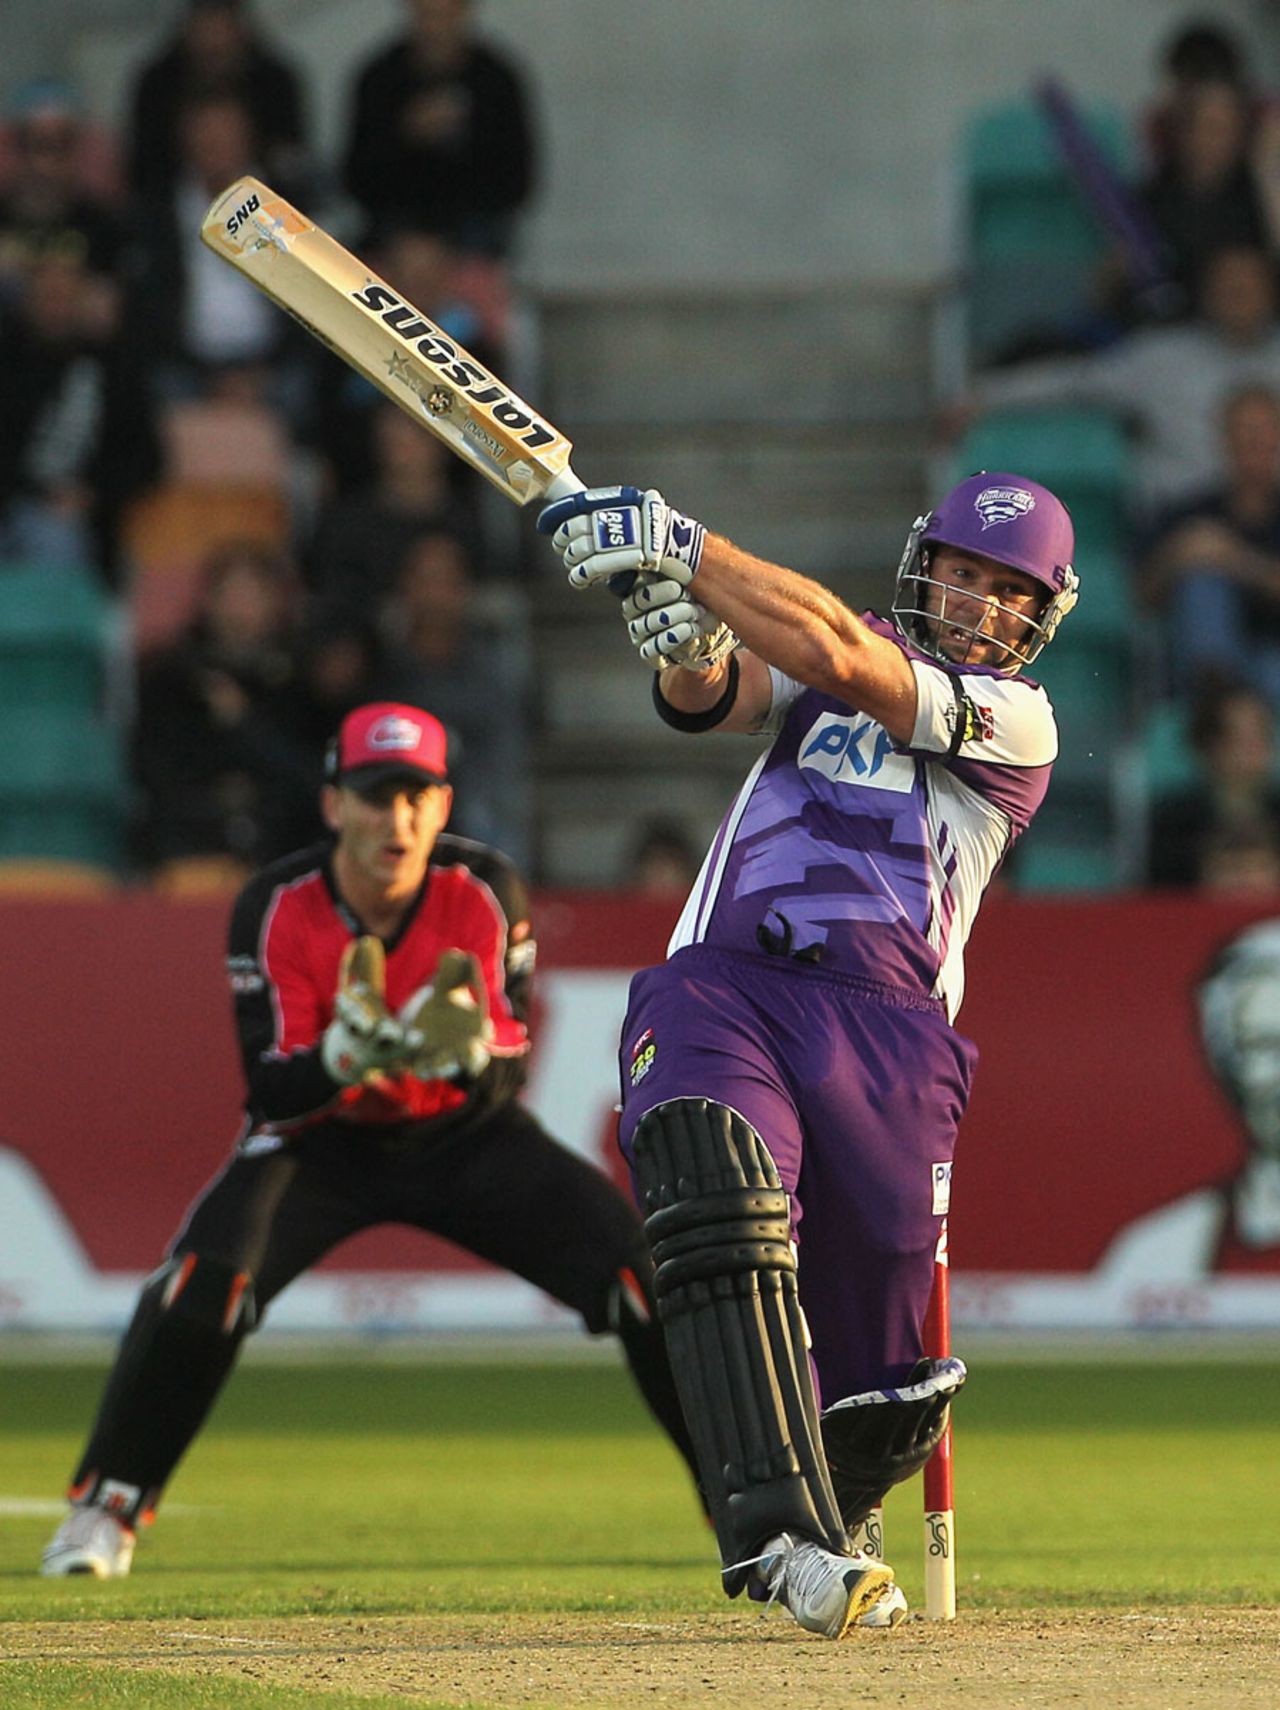 Travis Birt powers the ball down the ground, Hobart Hurricanes v Sydney Sixers, BBL, Hobart, December 21, 2011